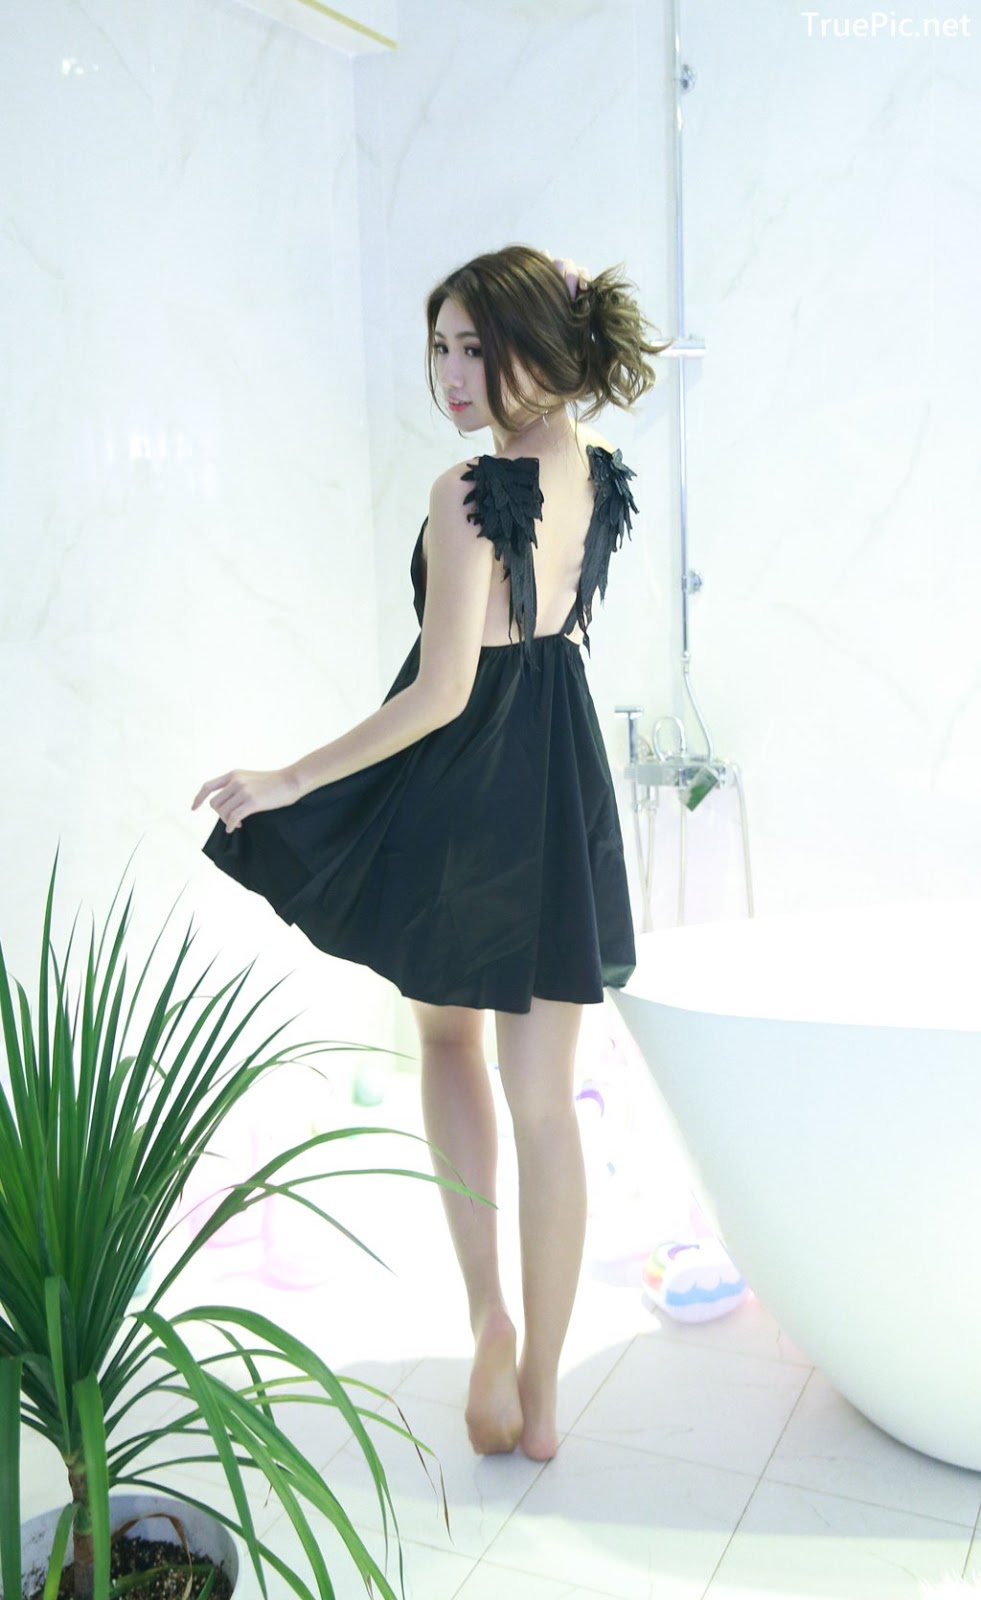 Image-Taiwanese-Model–張倫甄–Charming-Girl-With-Black-Sleep-Dress-TruePic.net- Picture-66